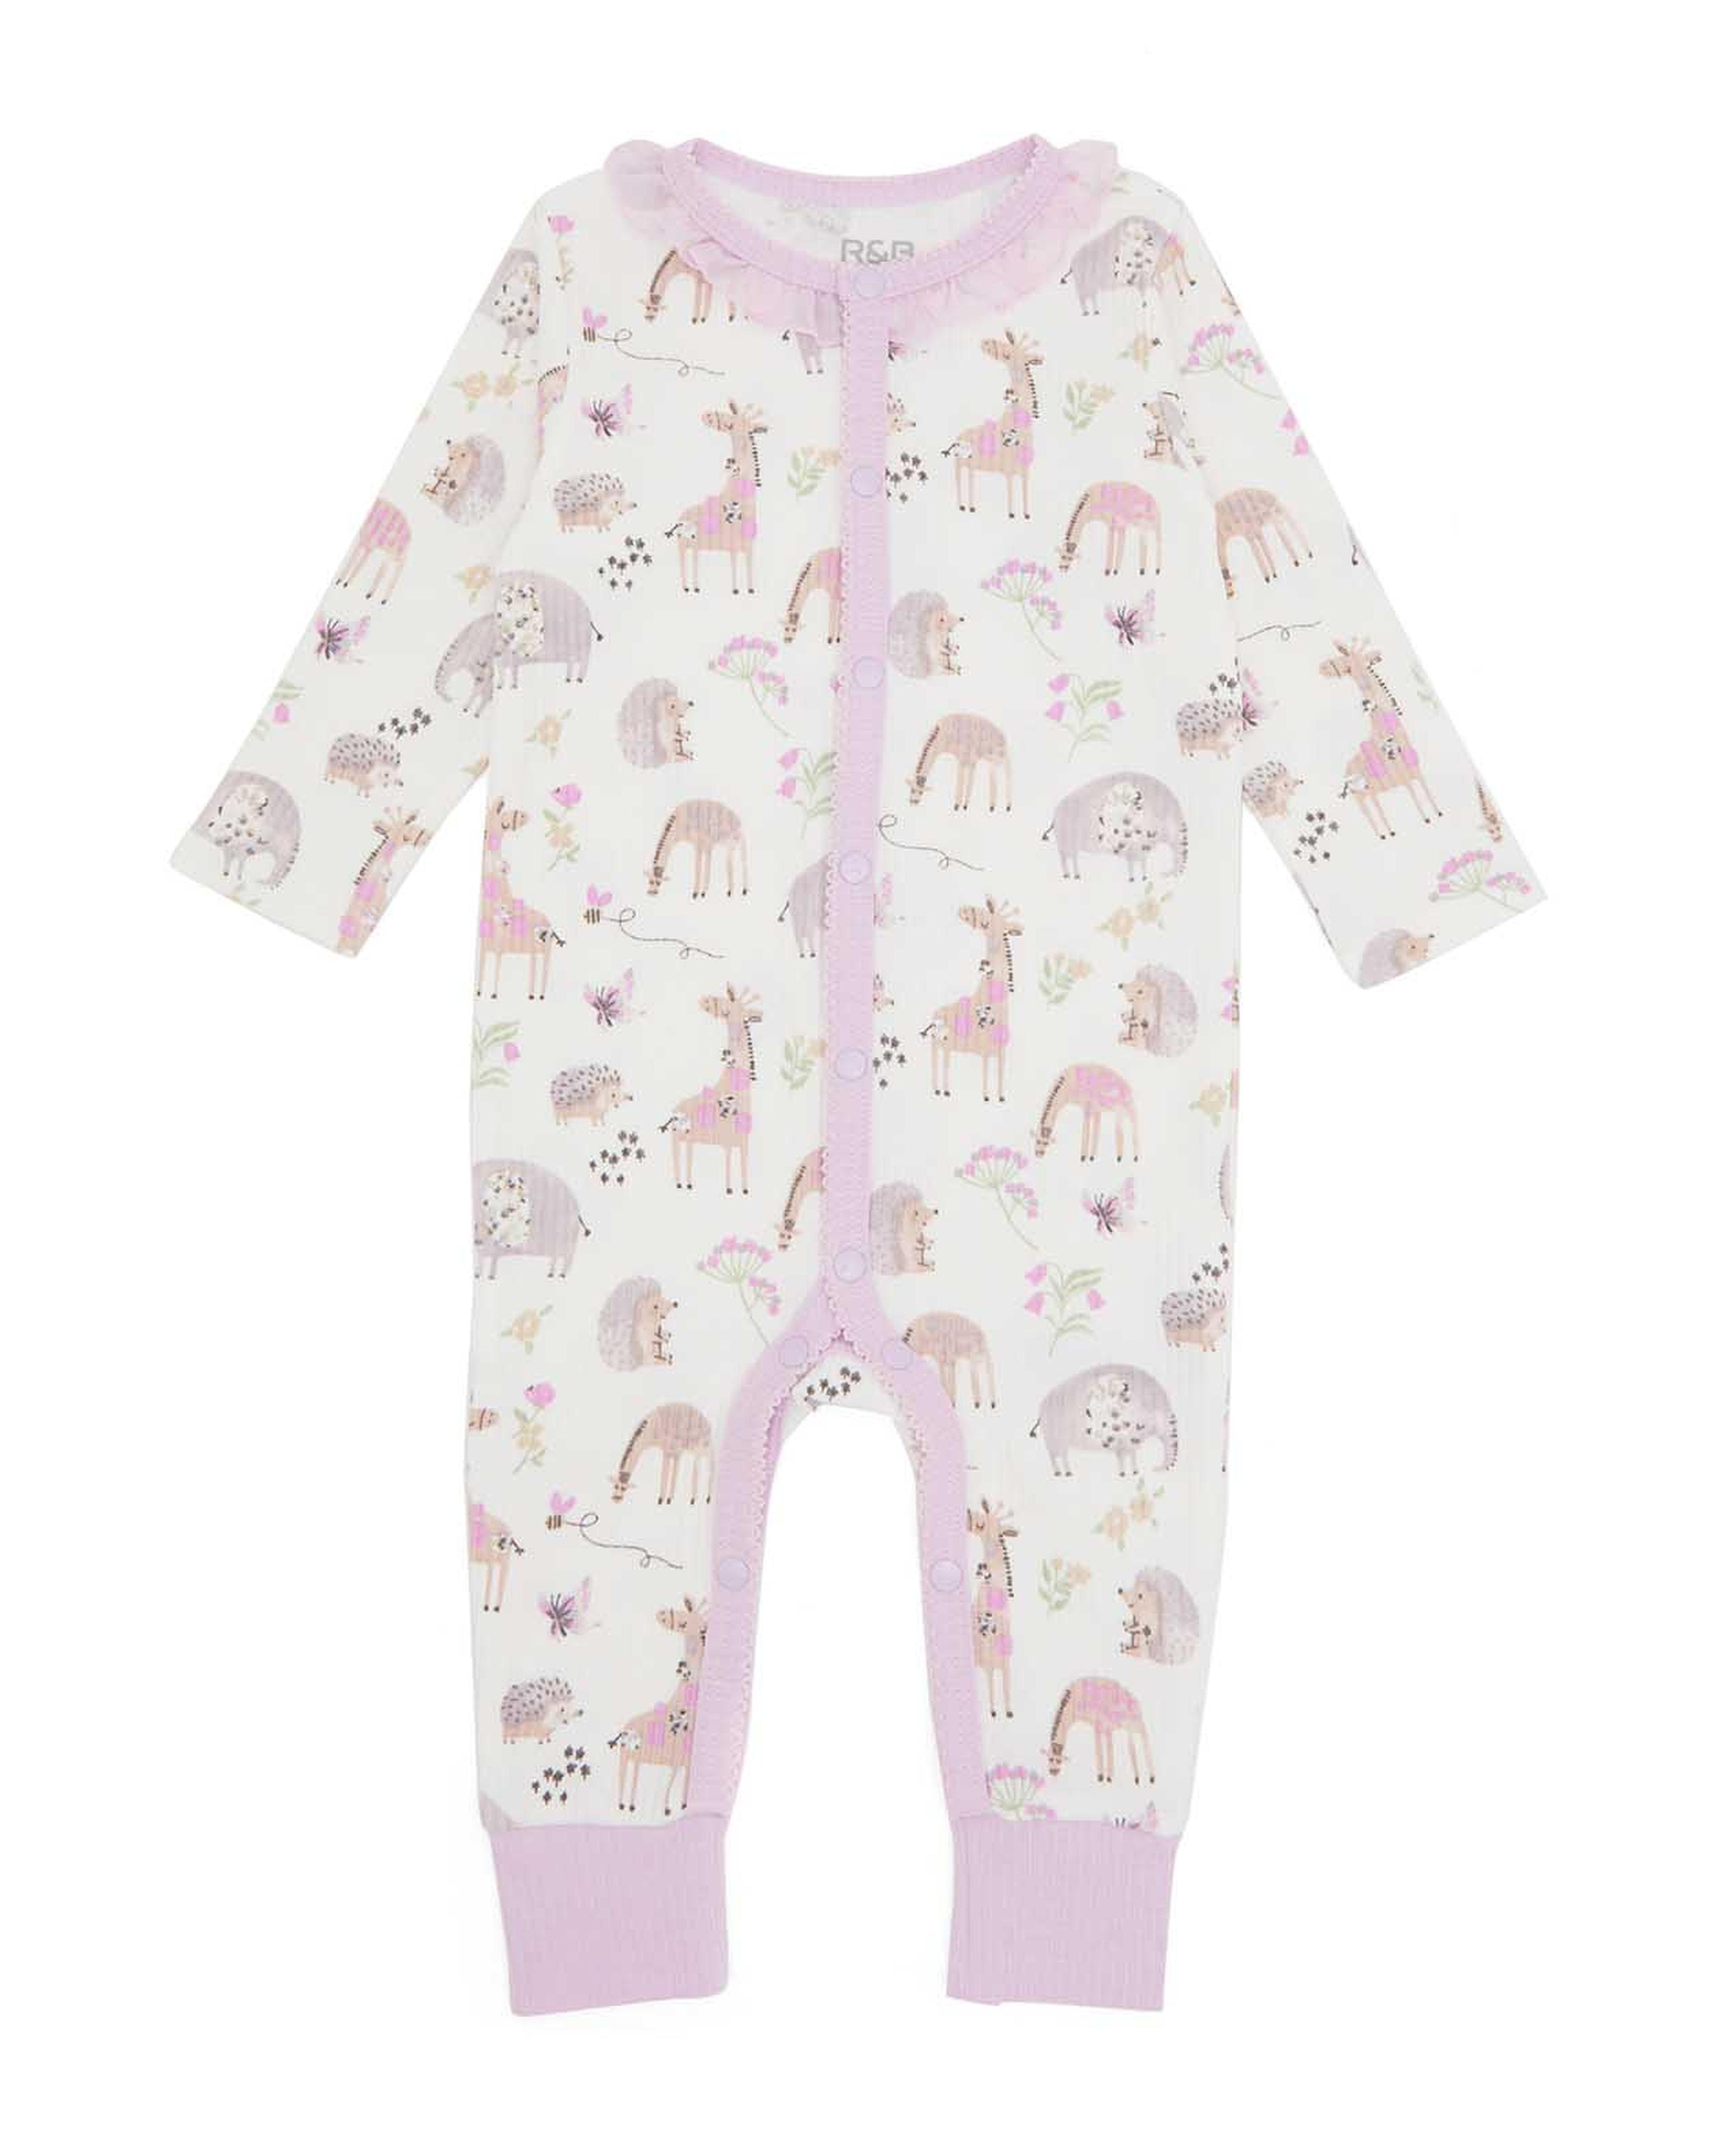 Printed Footed Sleepsuit with Long Sleeves